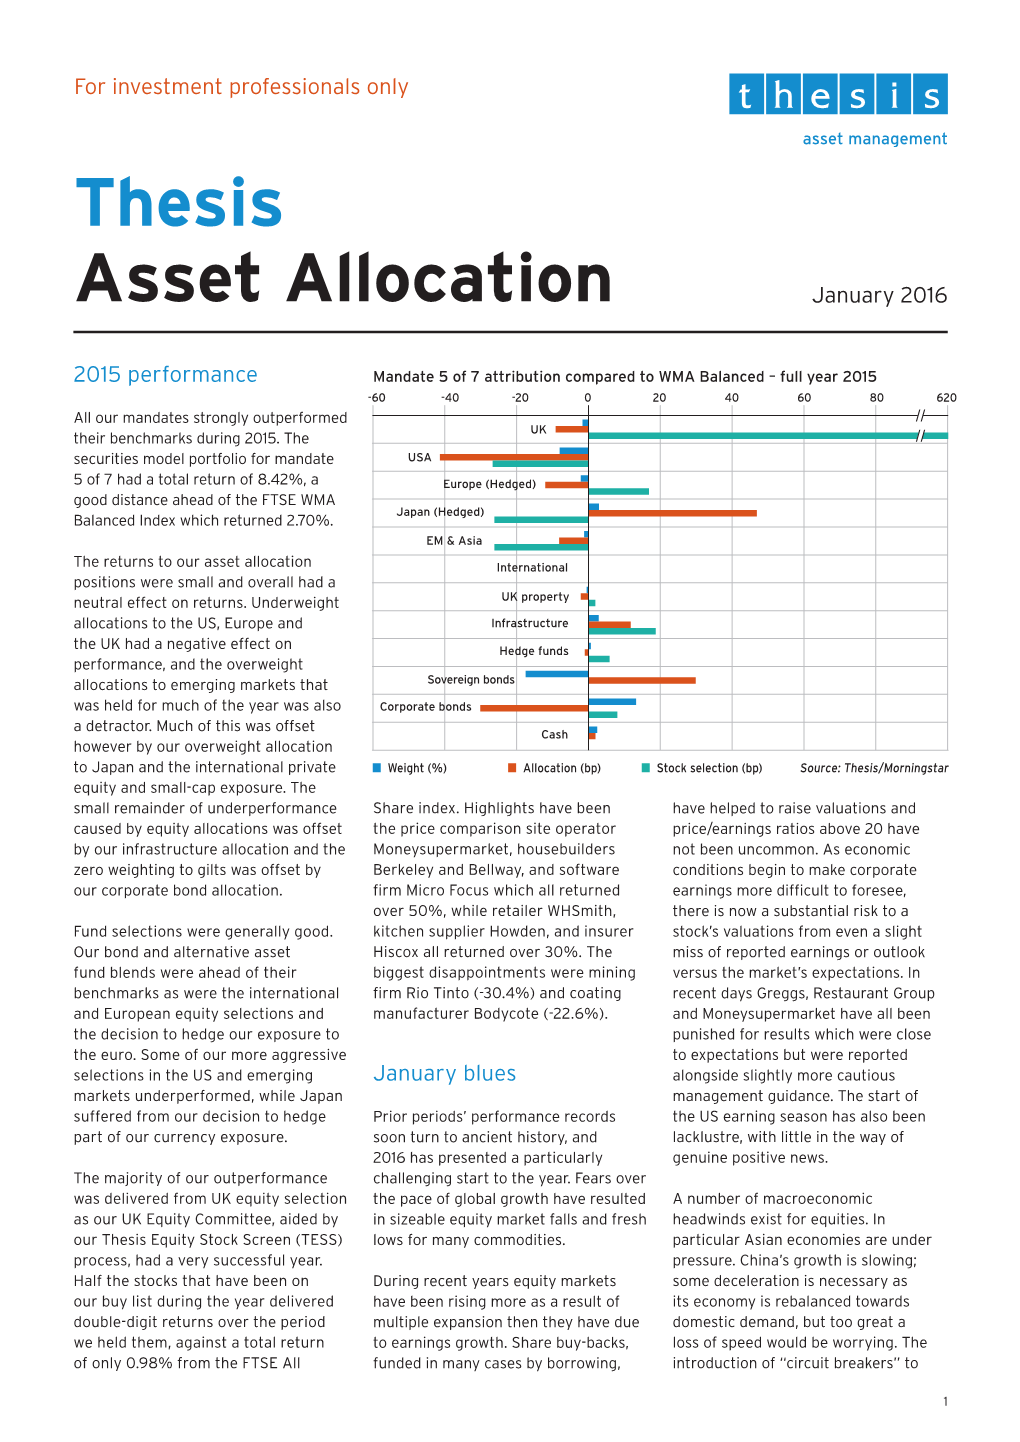 Thesis Asset Allocation